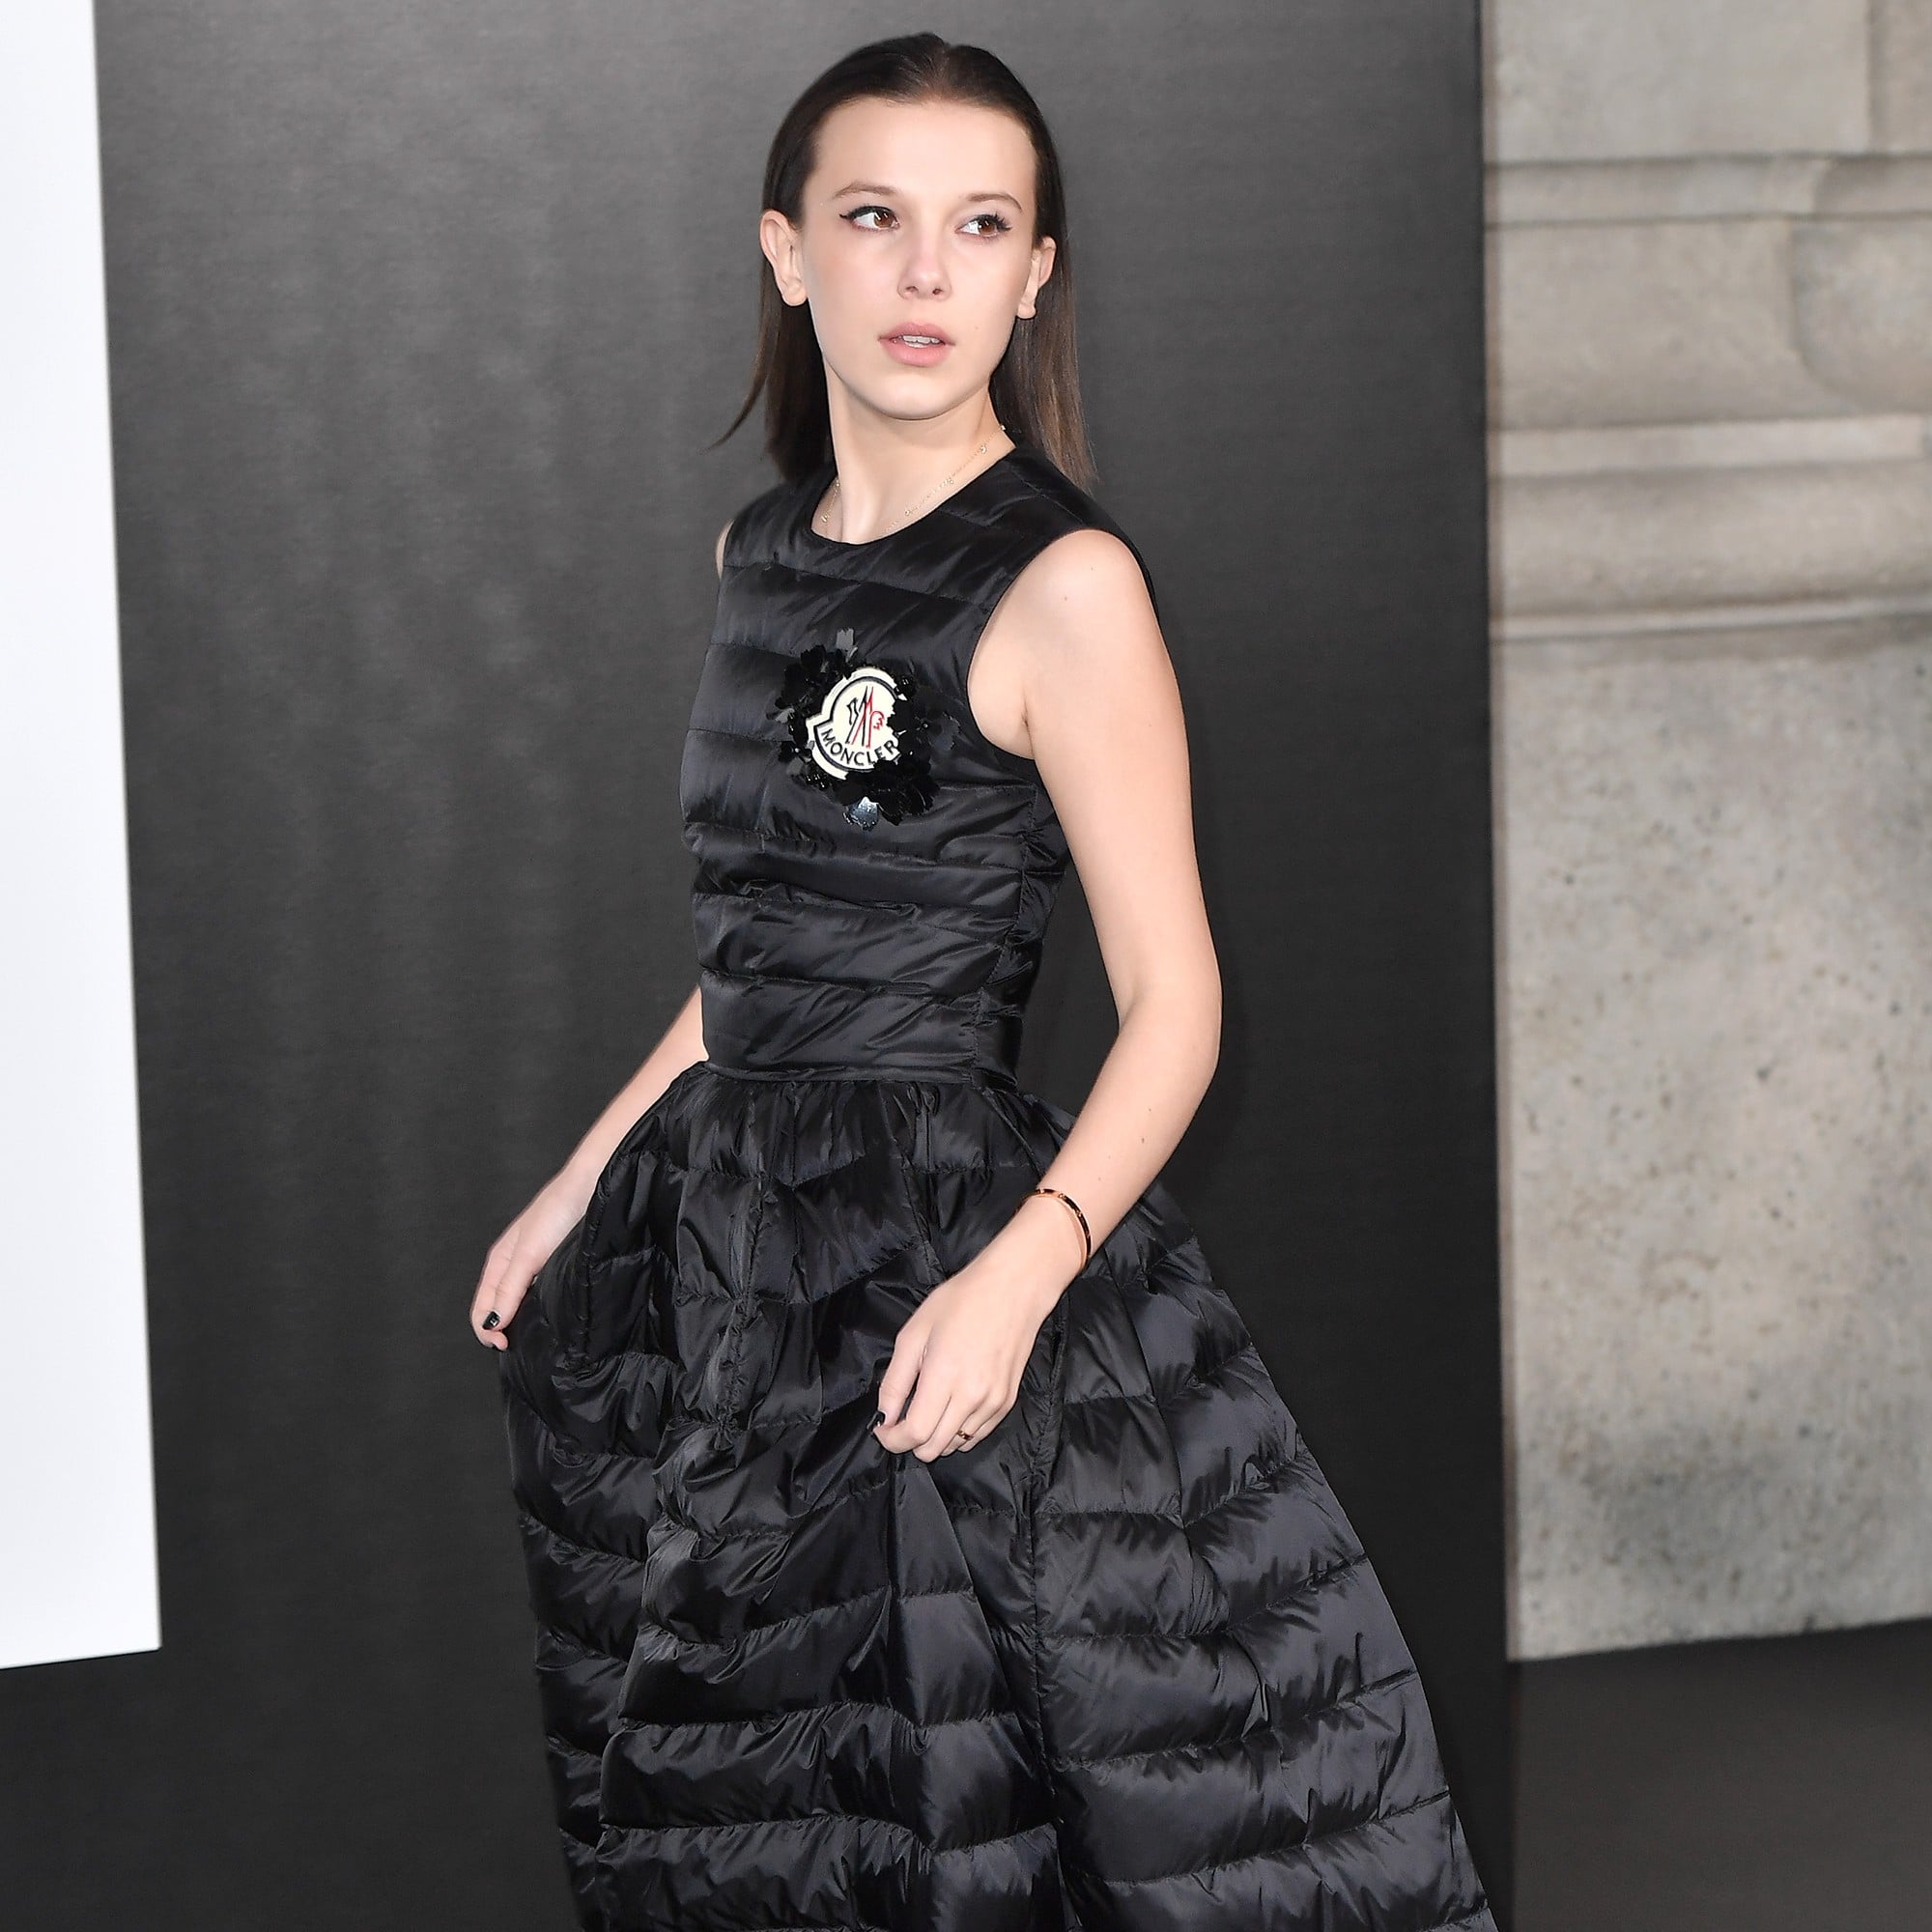 millie bobby brown attends the louis vuitton x cocktail party in